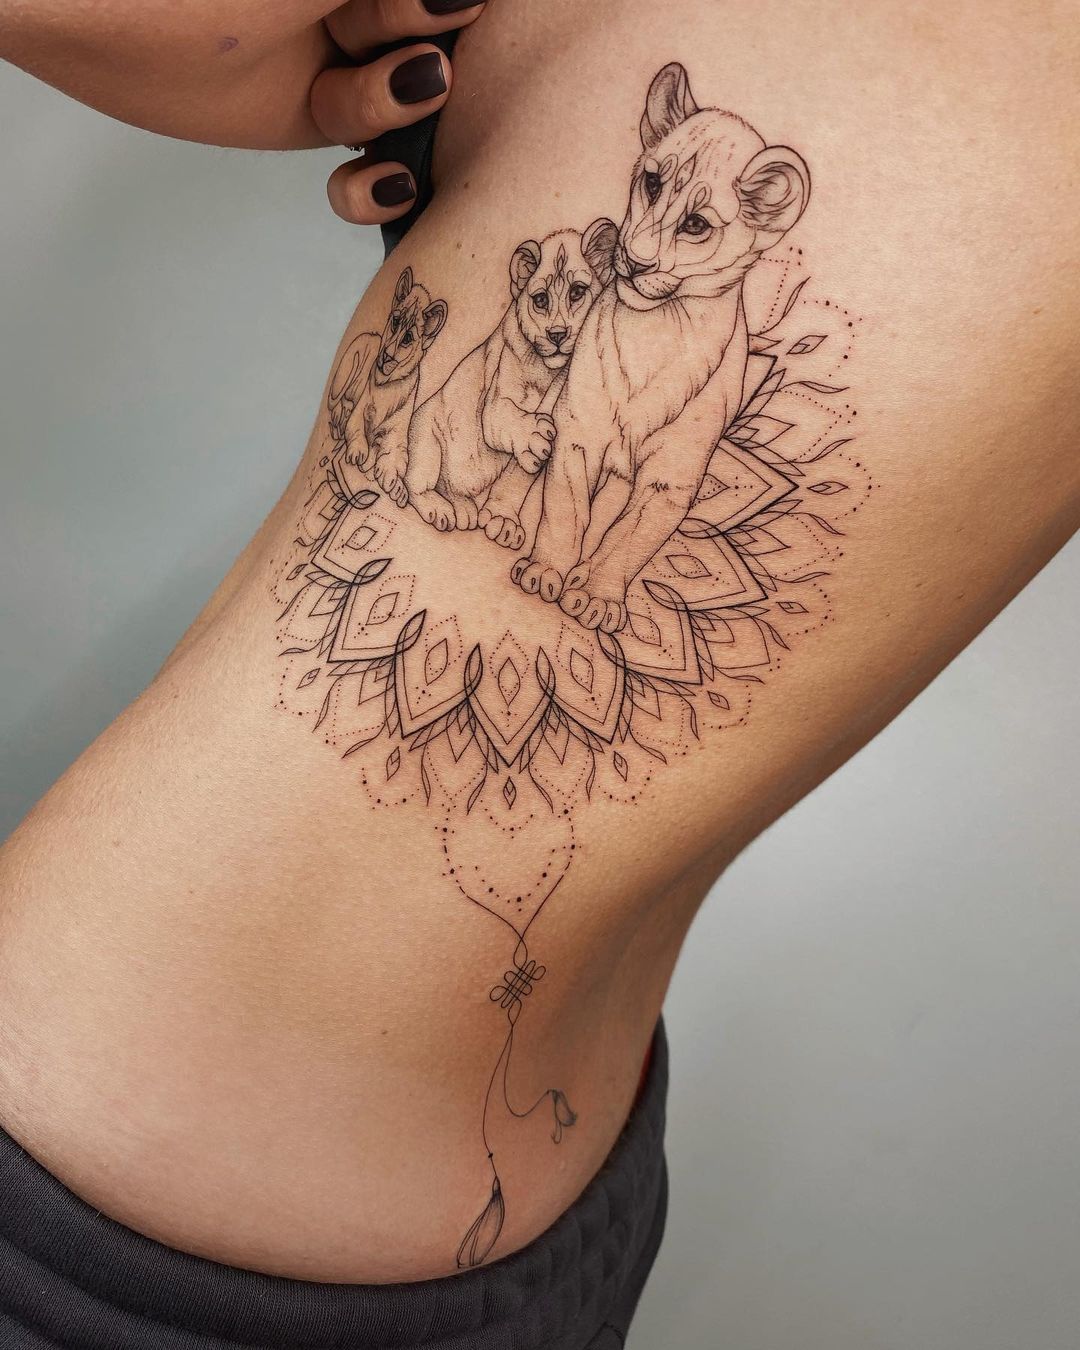 21 Awesome Lion Tattoo Ideas For Women - Styleoholic